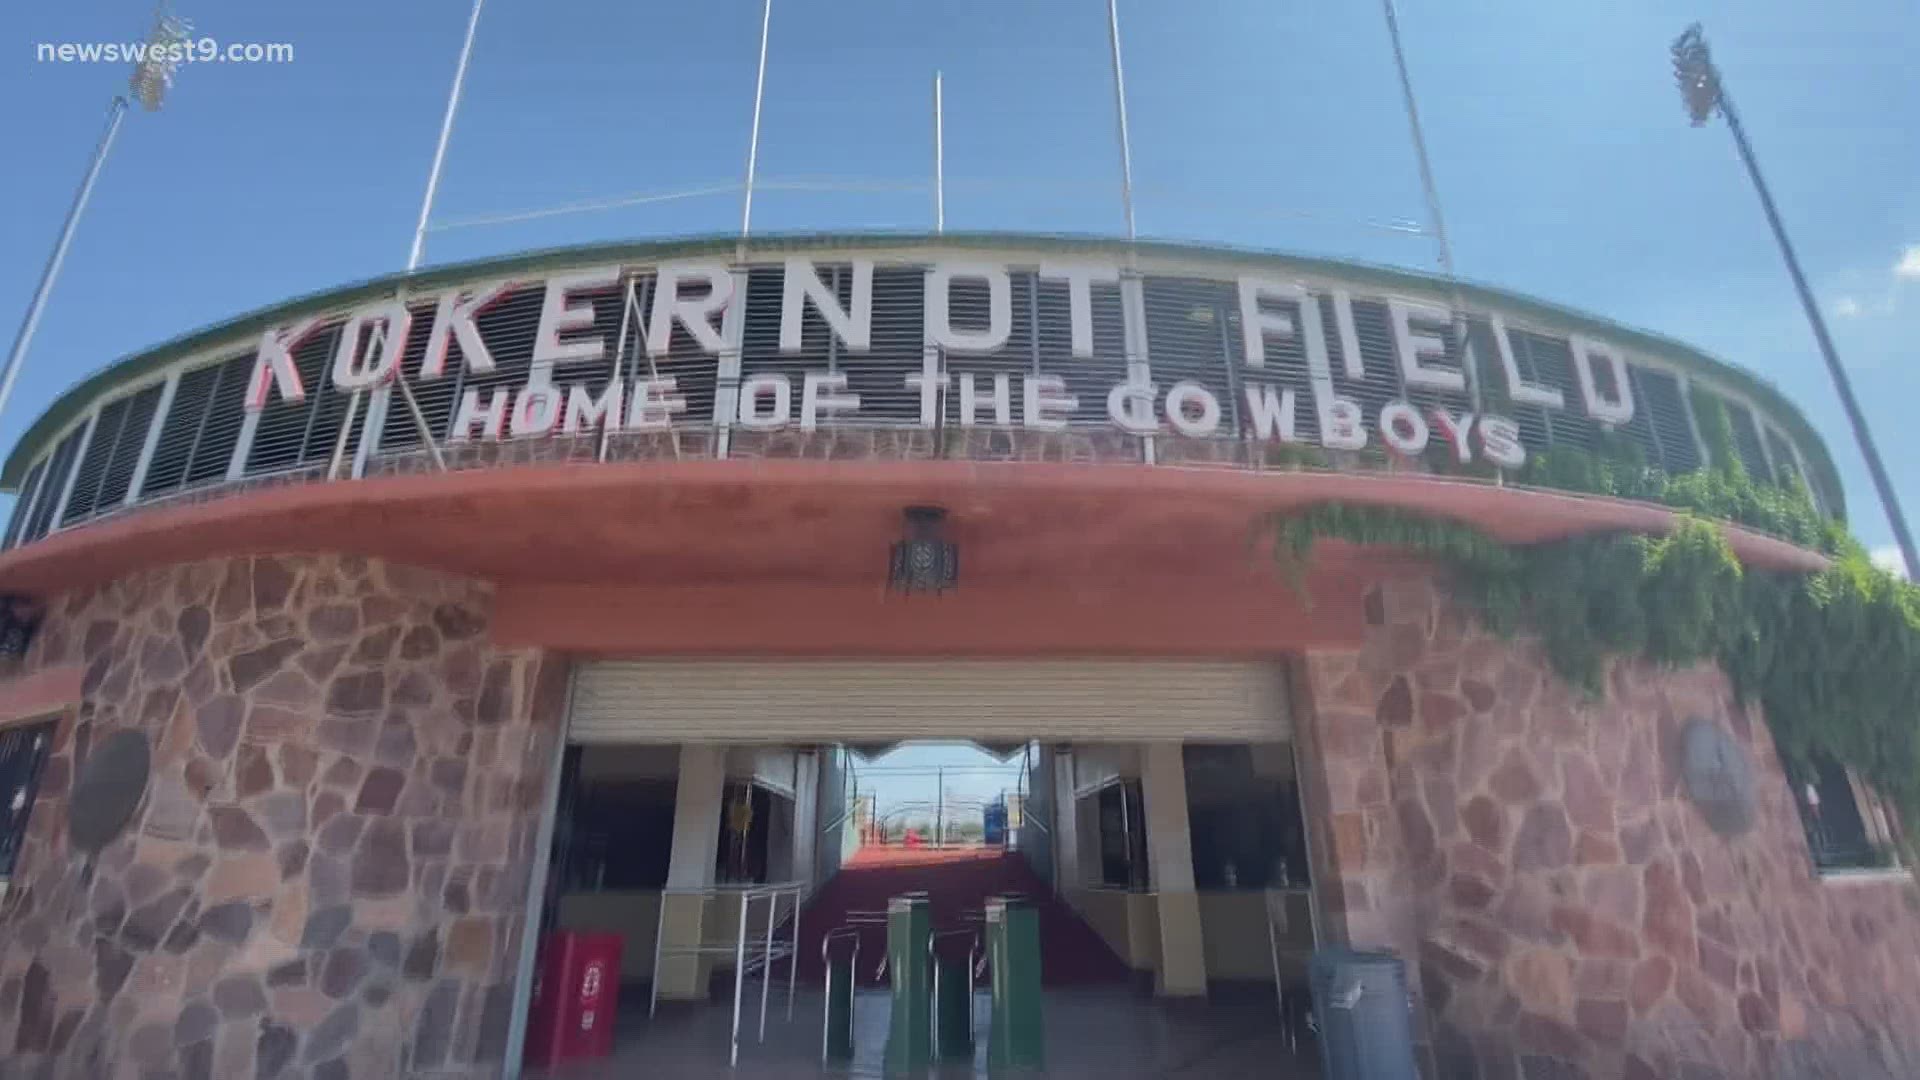 In West Texas, we take great pride in what we do. And if you’re going to do something, you better do it right. That is the story of Kokernot Field.